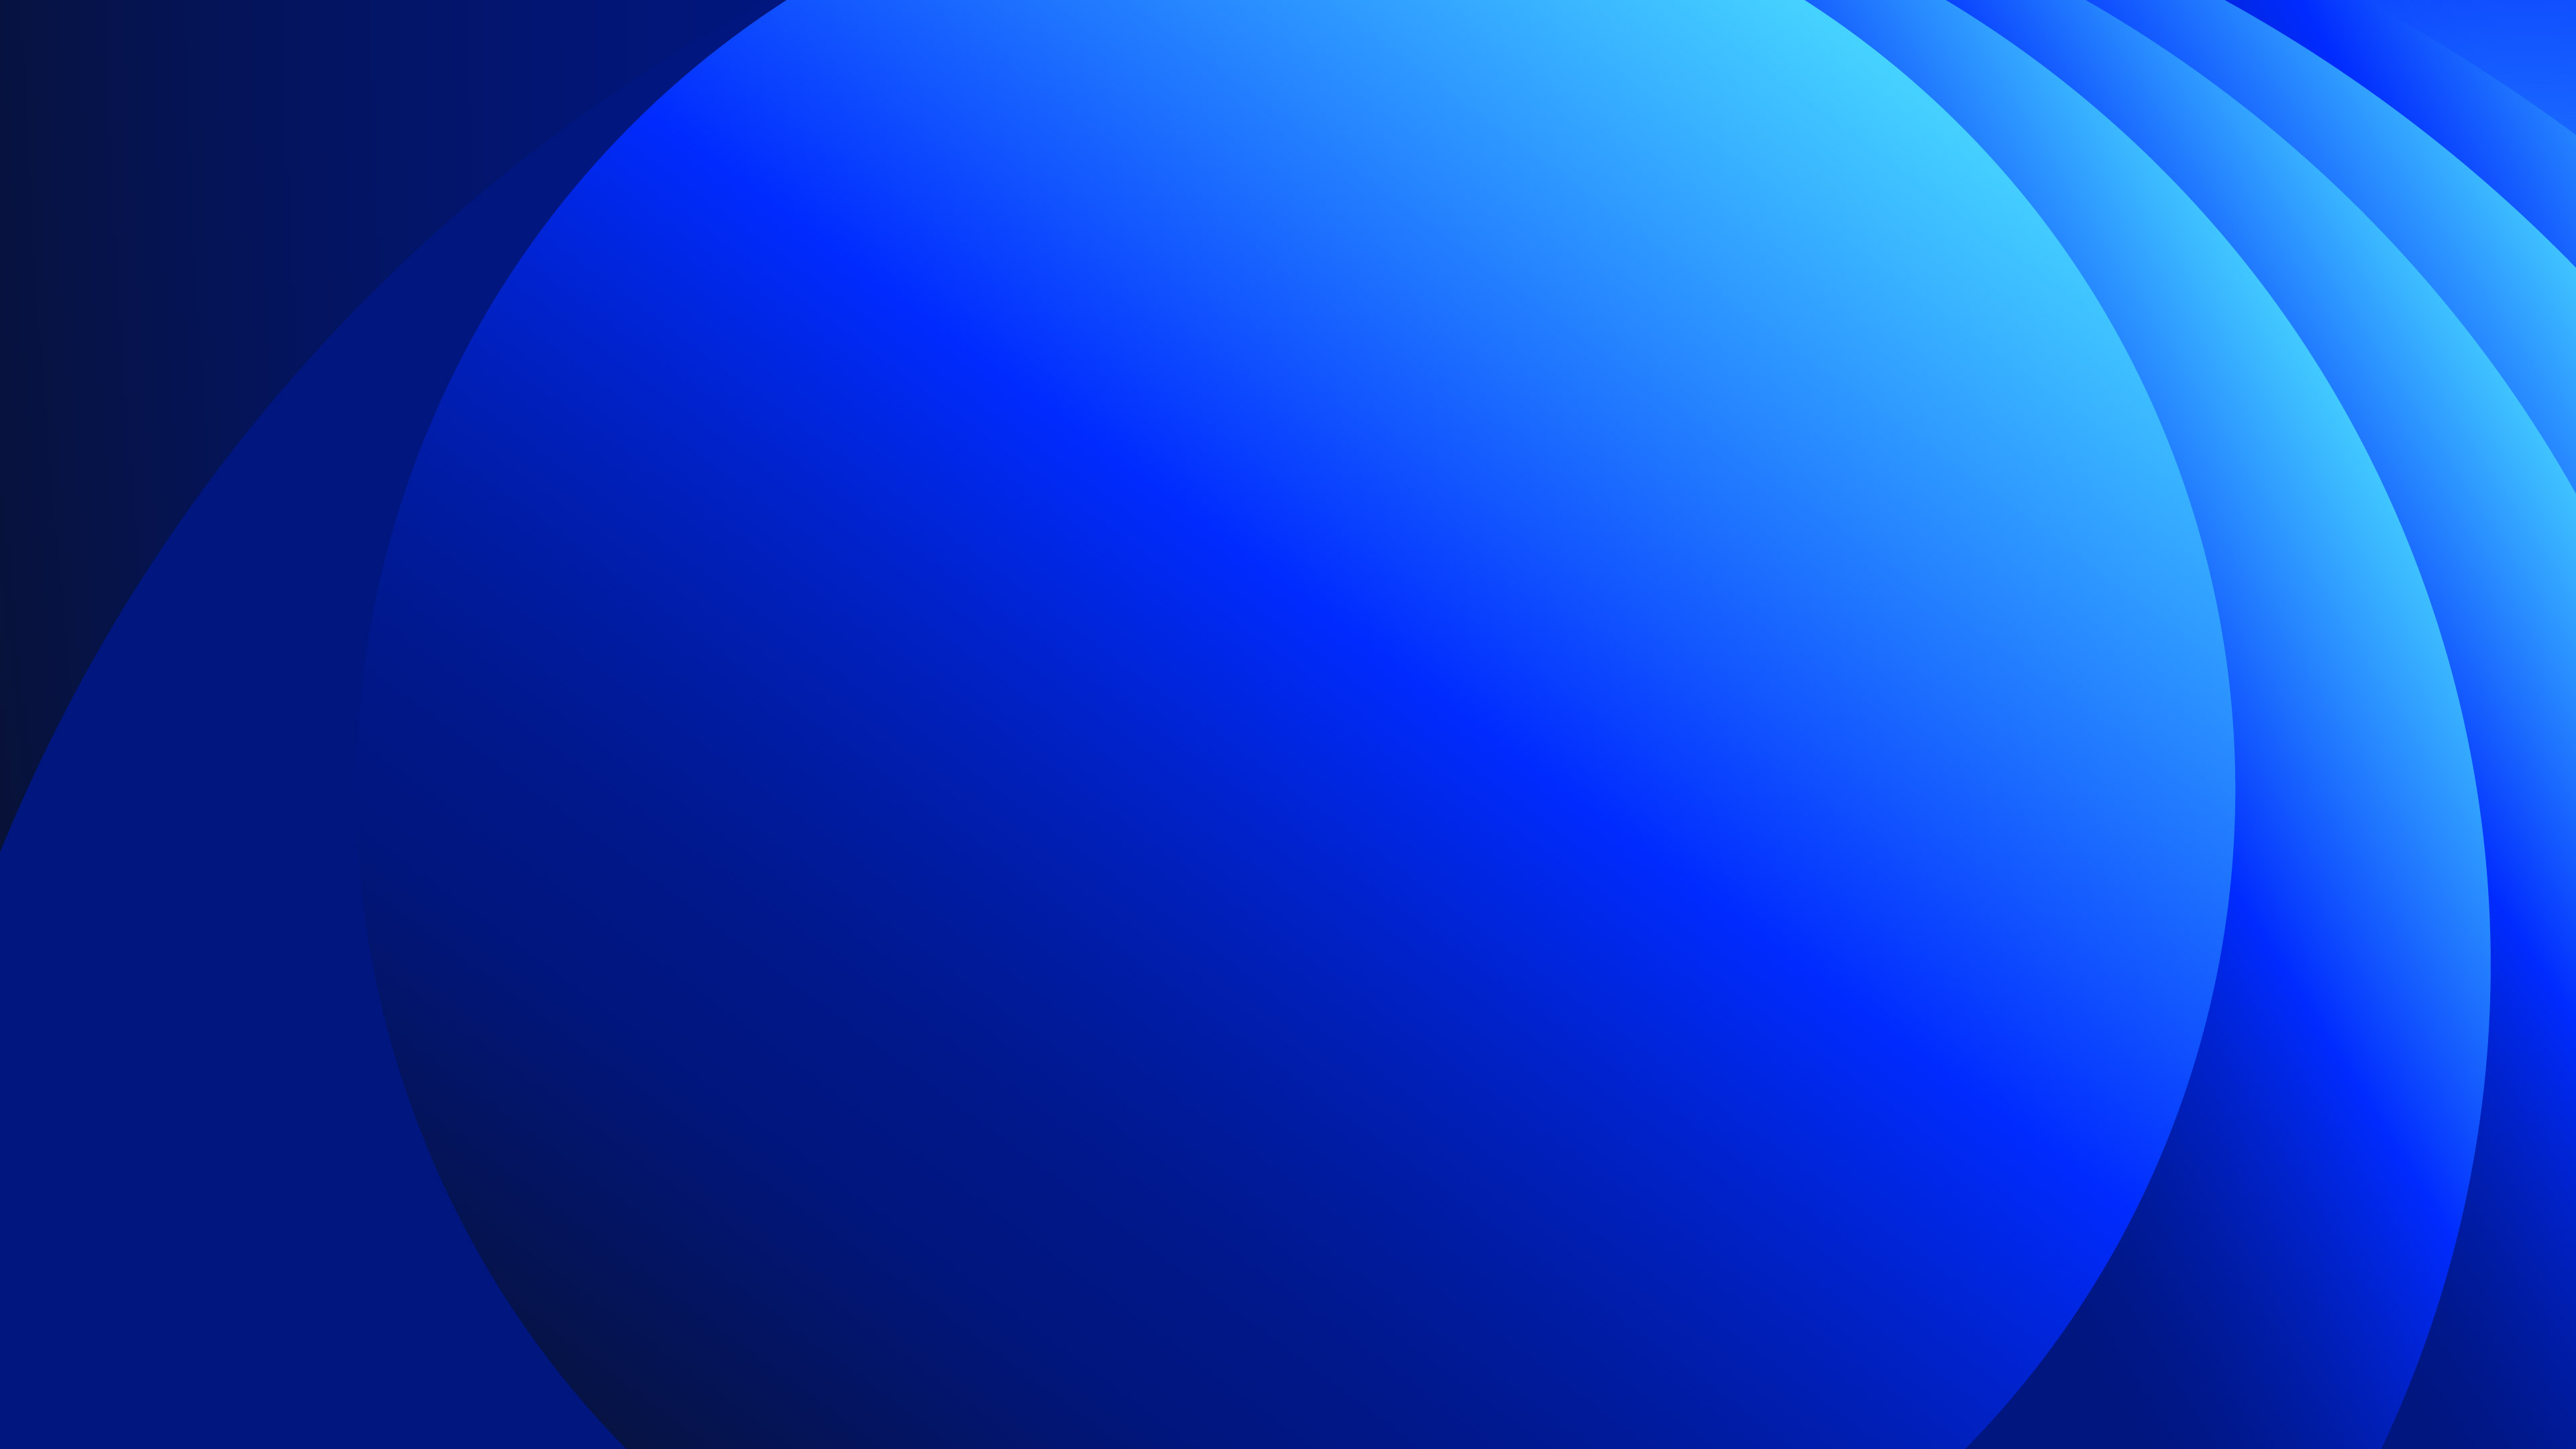 Layered circular shapes with a striking blue gradient